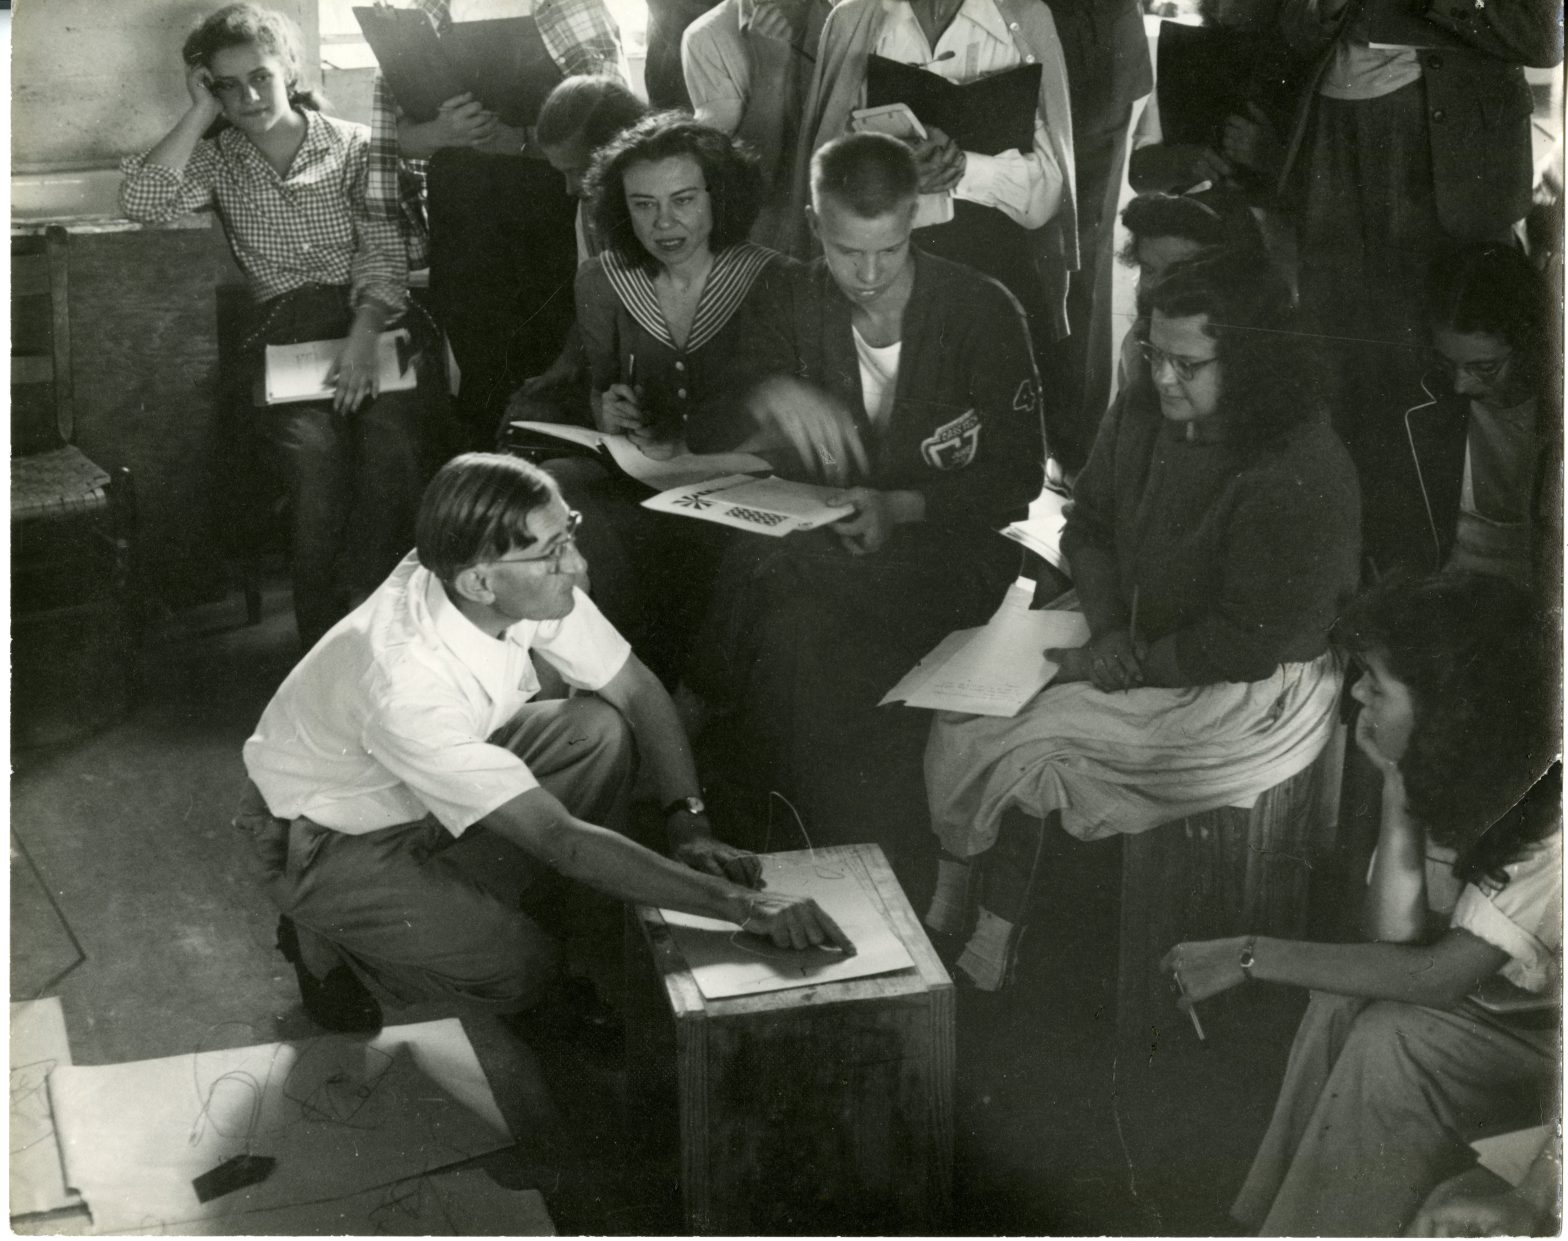 Black and white photo of a classroom, with young people sitting around on chairs and boxes watching the teacher (Josef Albers) who is crouching down at the front demonstrating something on a piece of paper.